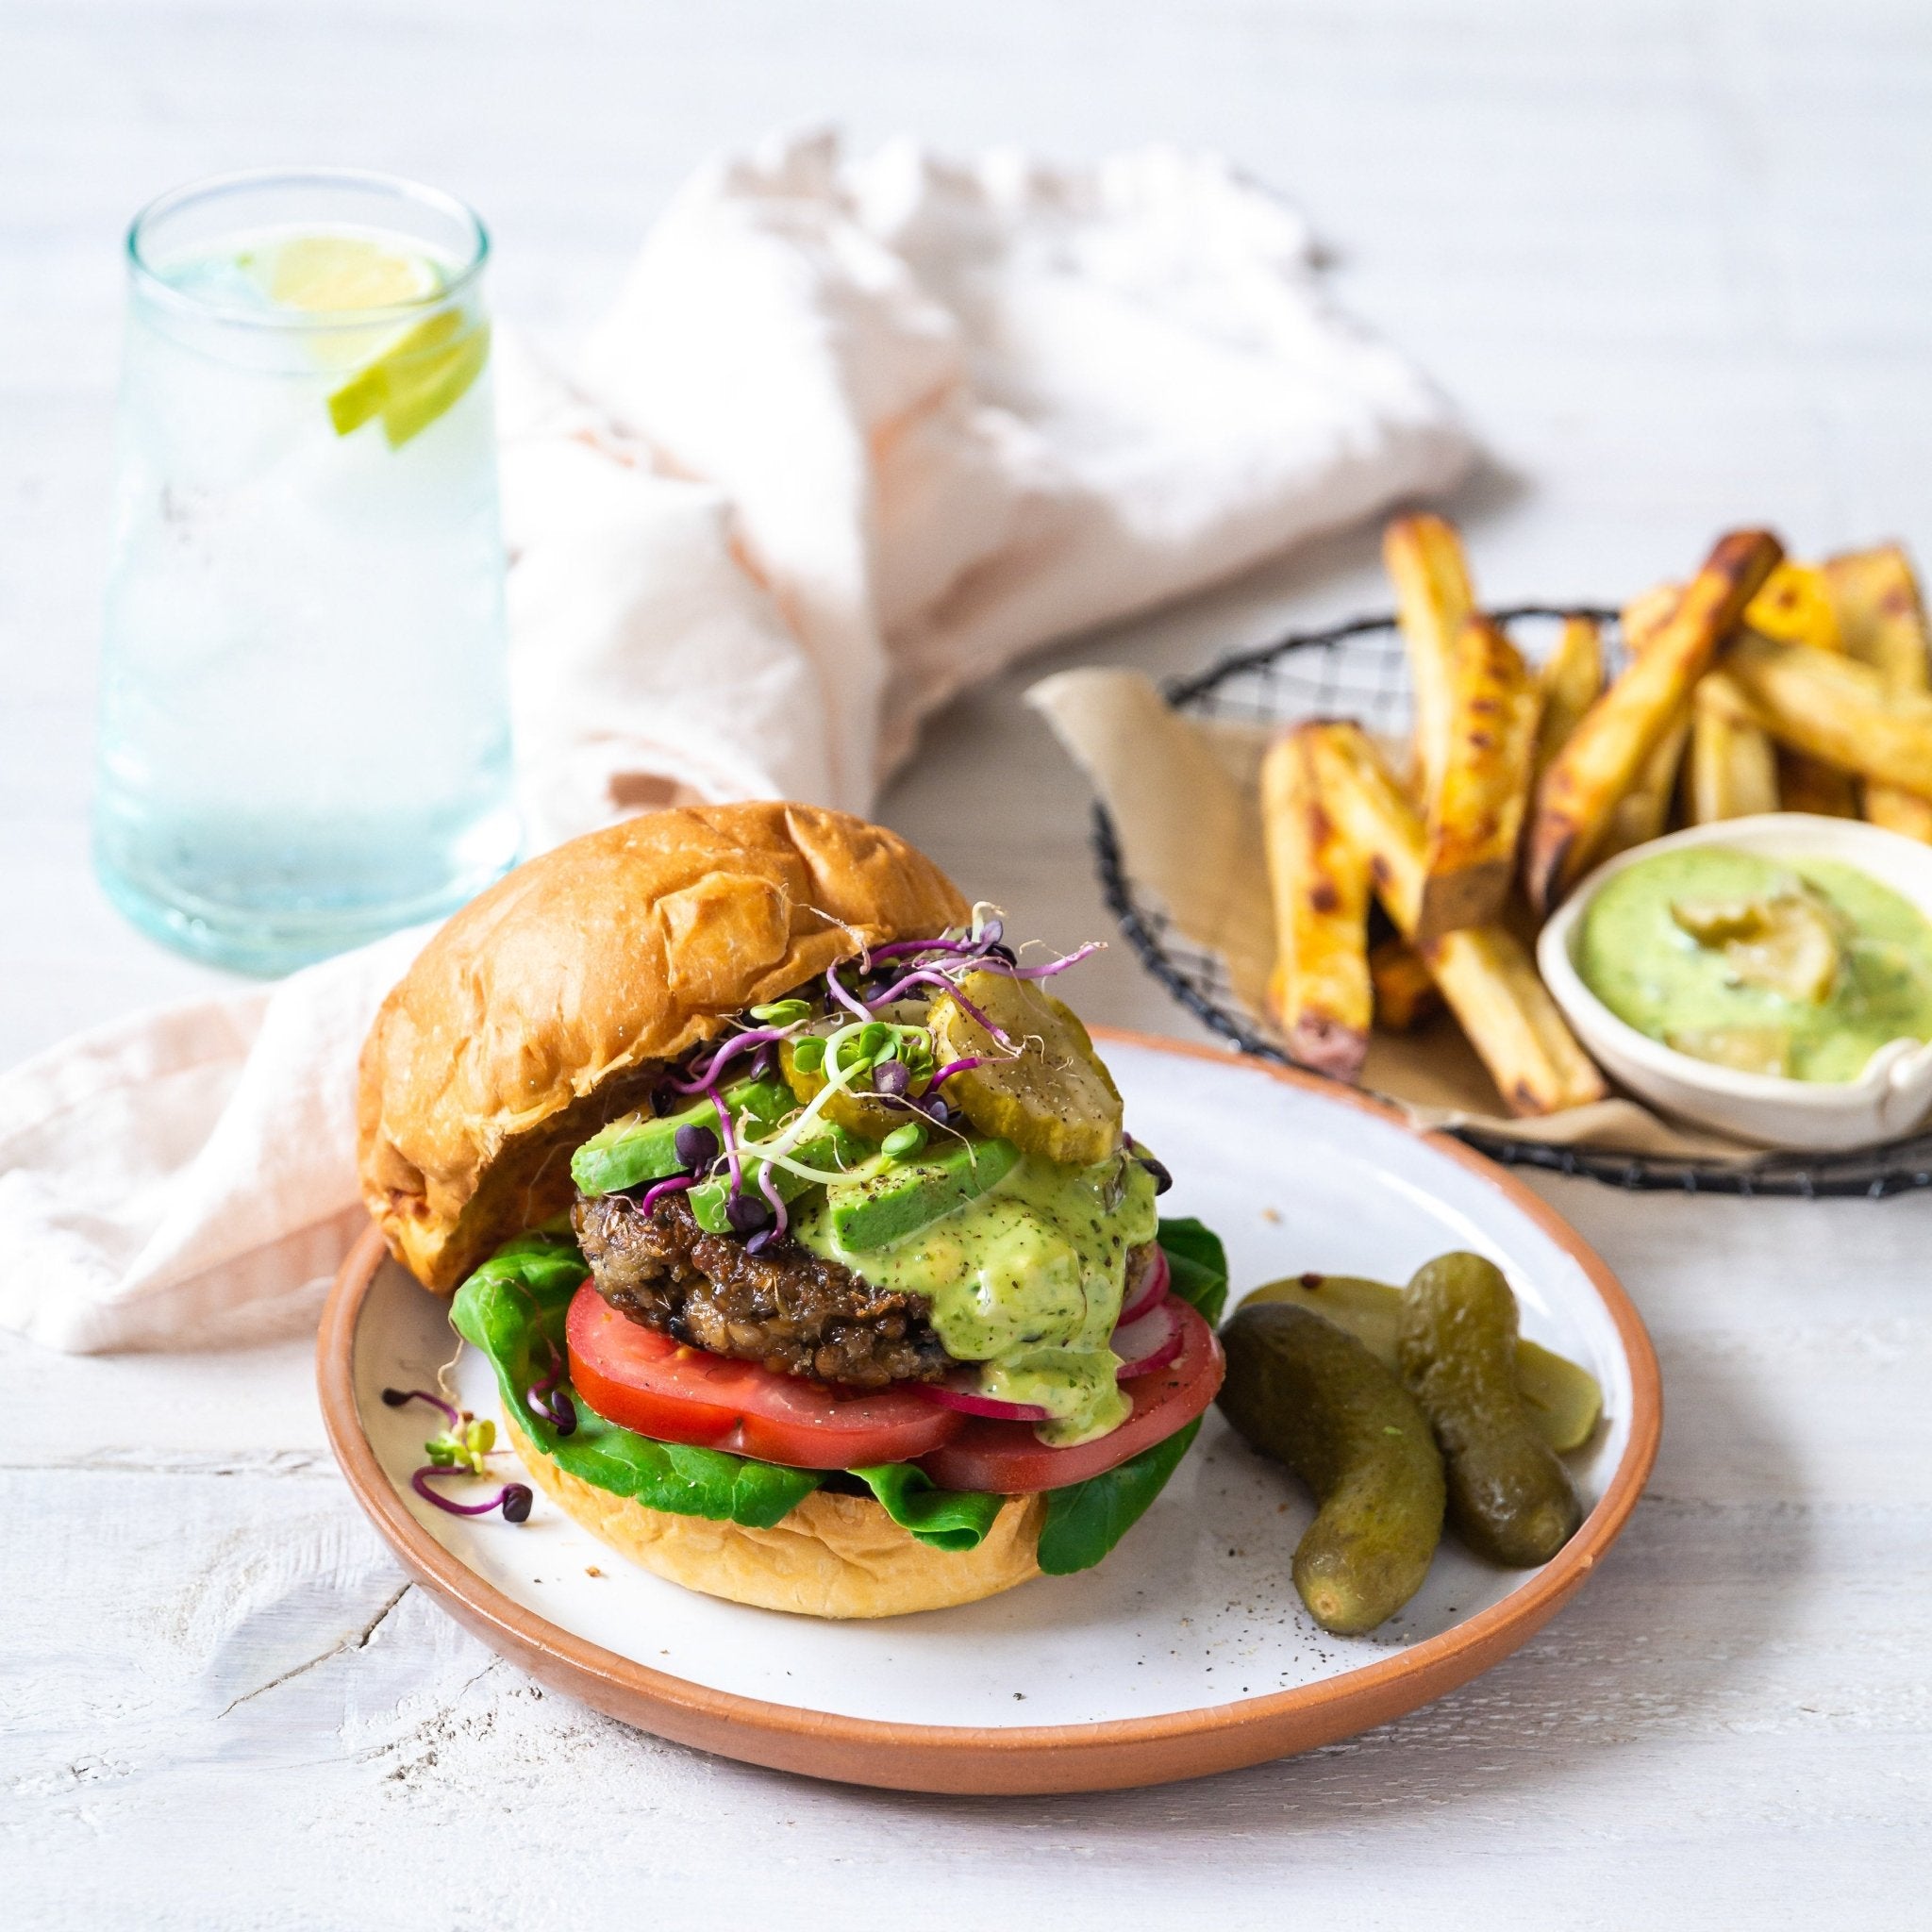 Vegetarian Burgers with Zingy McClure's Pickle and Pesto Sauce - Cook & Nelson